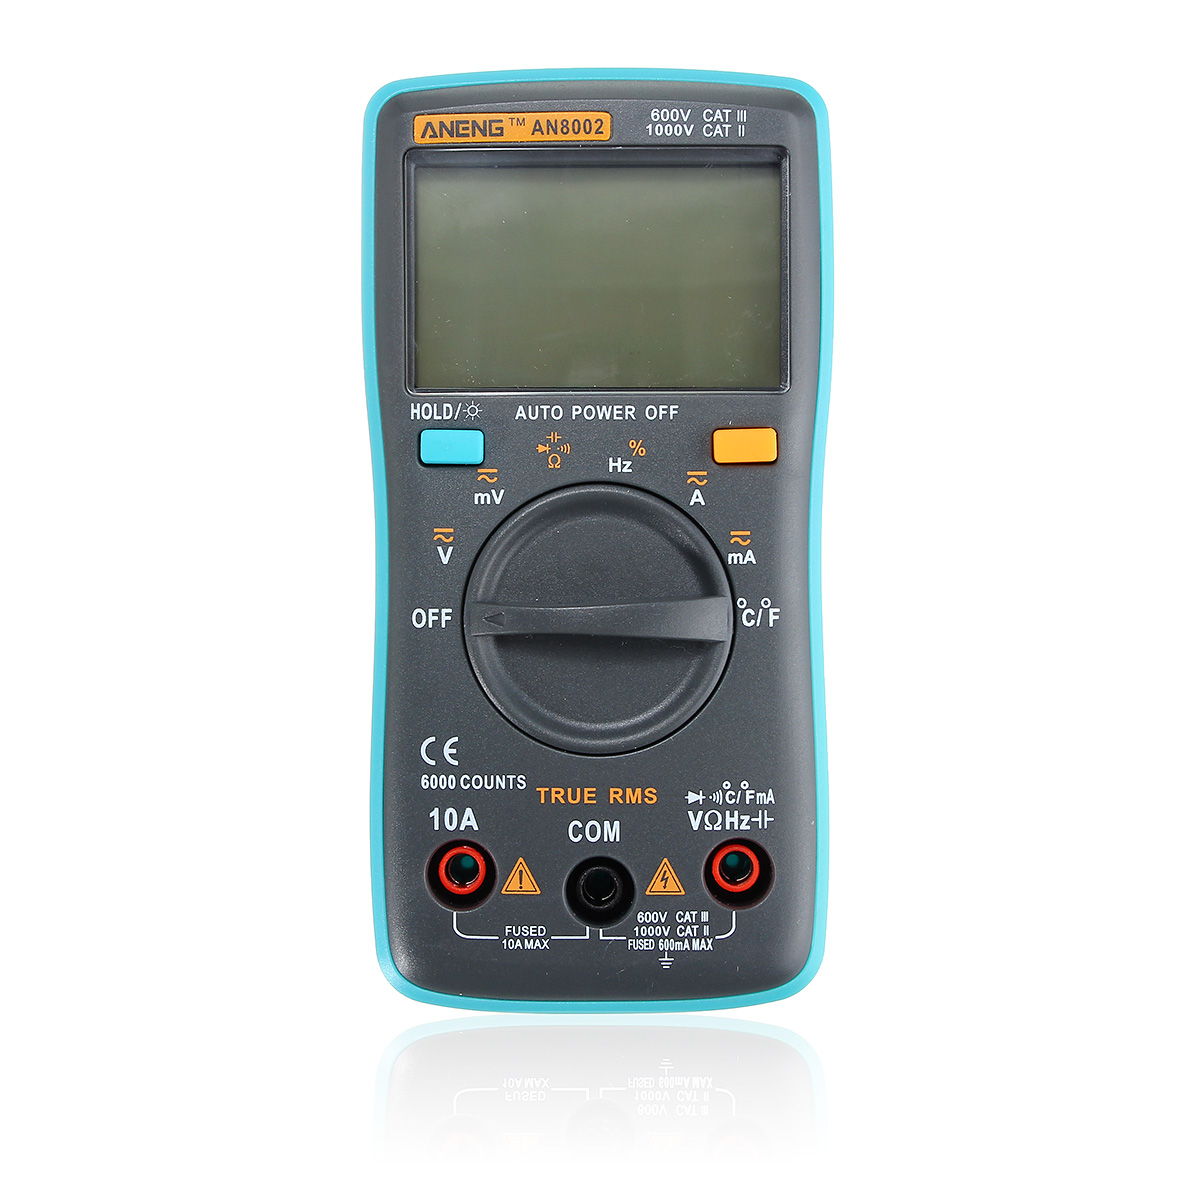 ANENG AN8002 Digital True RMS 6000 Counts Multimeter AC/DC Current Voltage Frequency Resistance Temperature Tester ℃/℉ 14